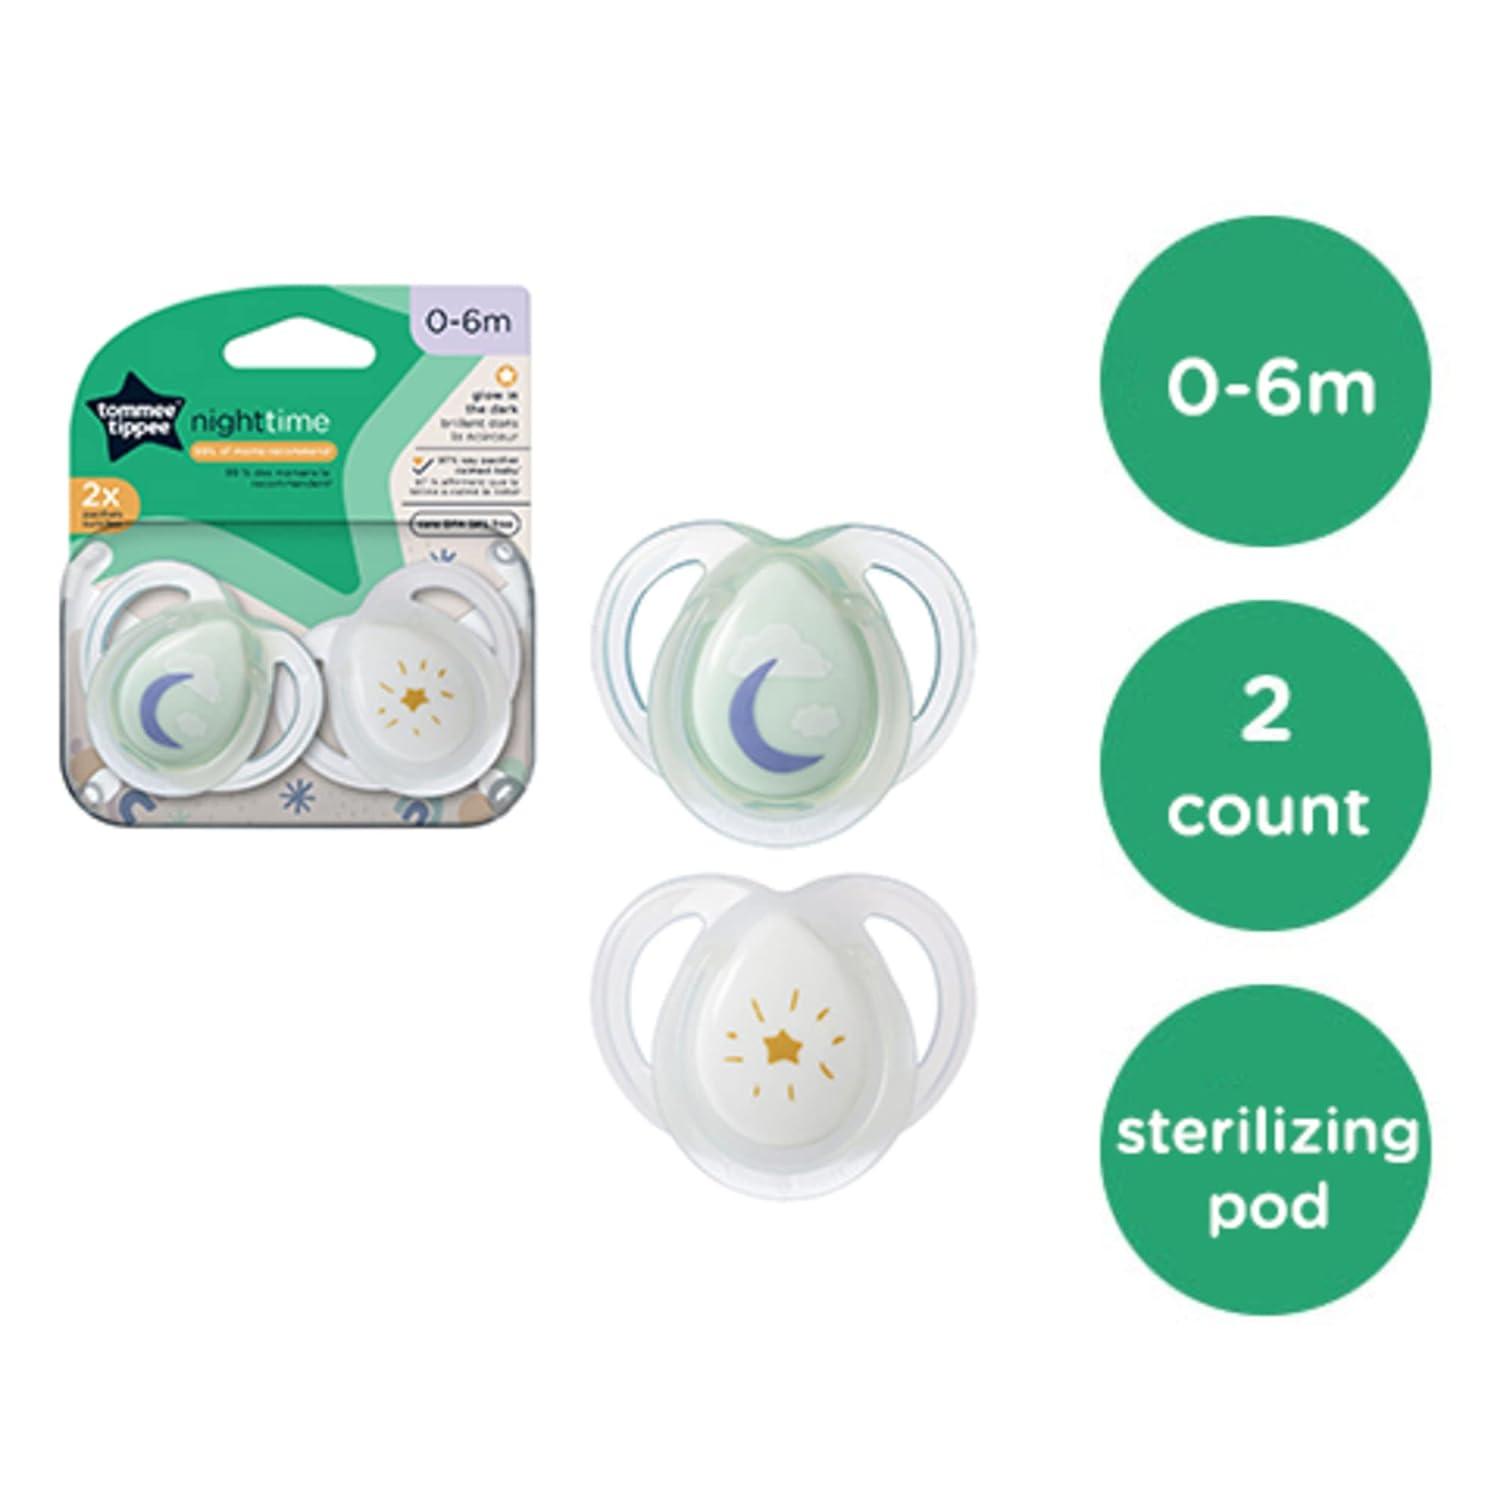 Tommee Tippee Night Time Glow in The Dark Pacifiers Symmetrical Design  BPA-Free Silicone Nipple Includes Sterilizer Box 0-6m 2 Count 0-6 Months